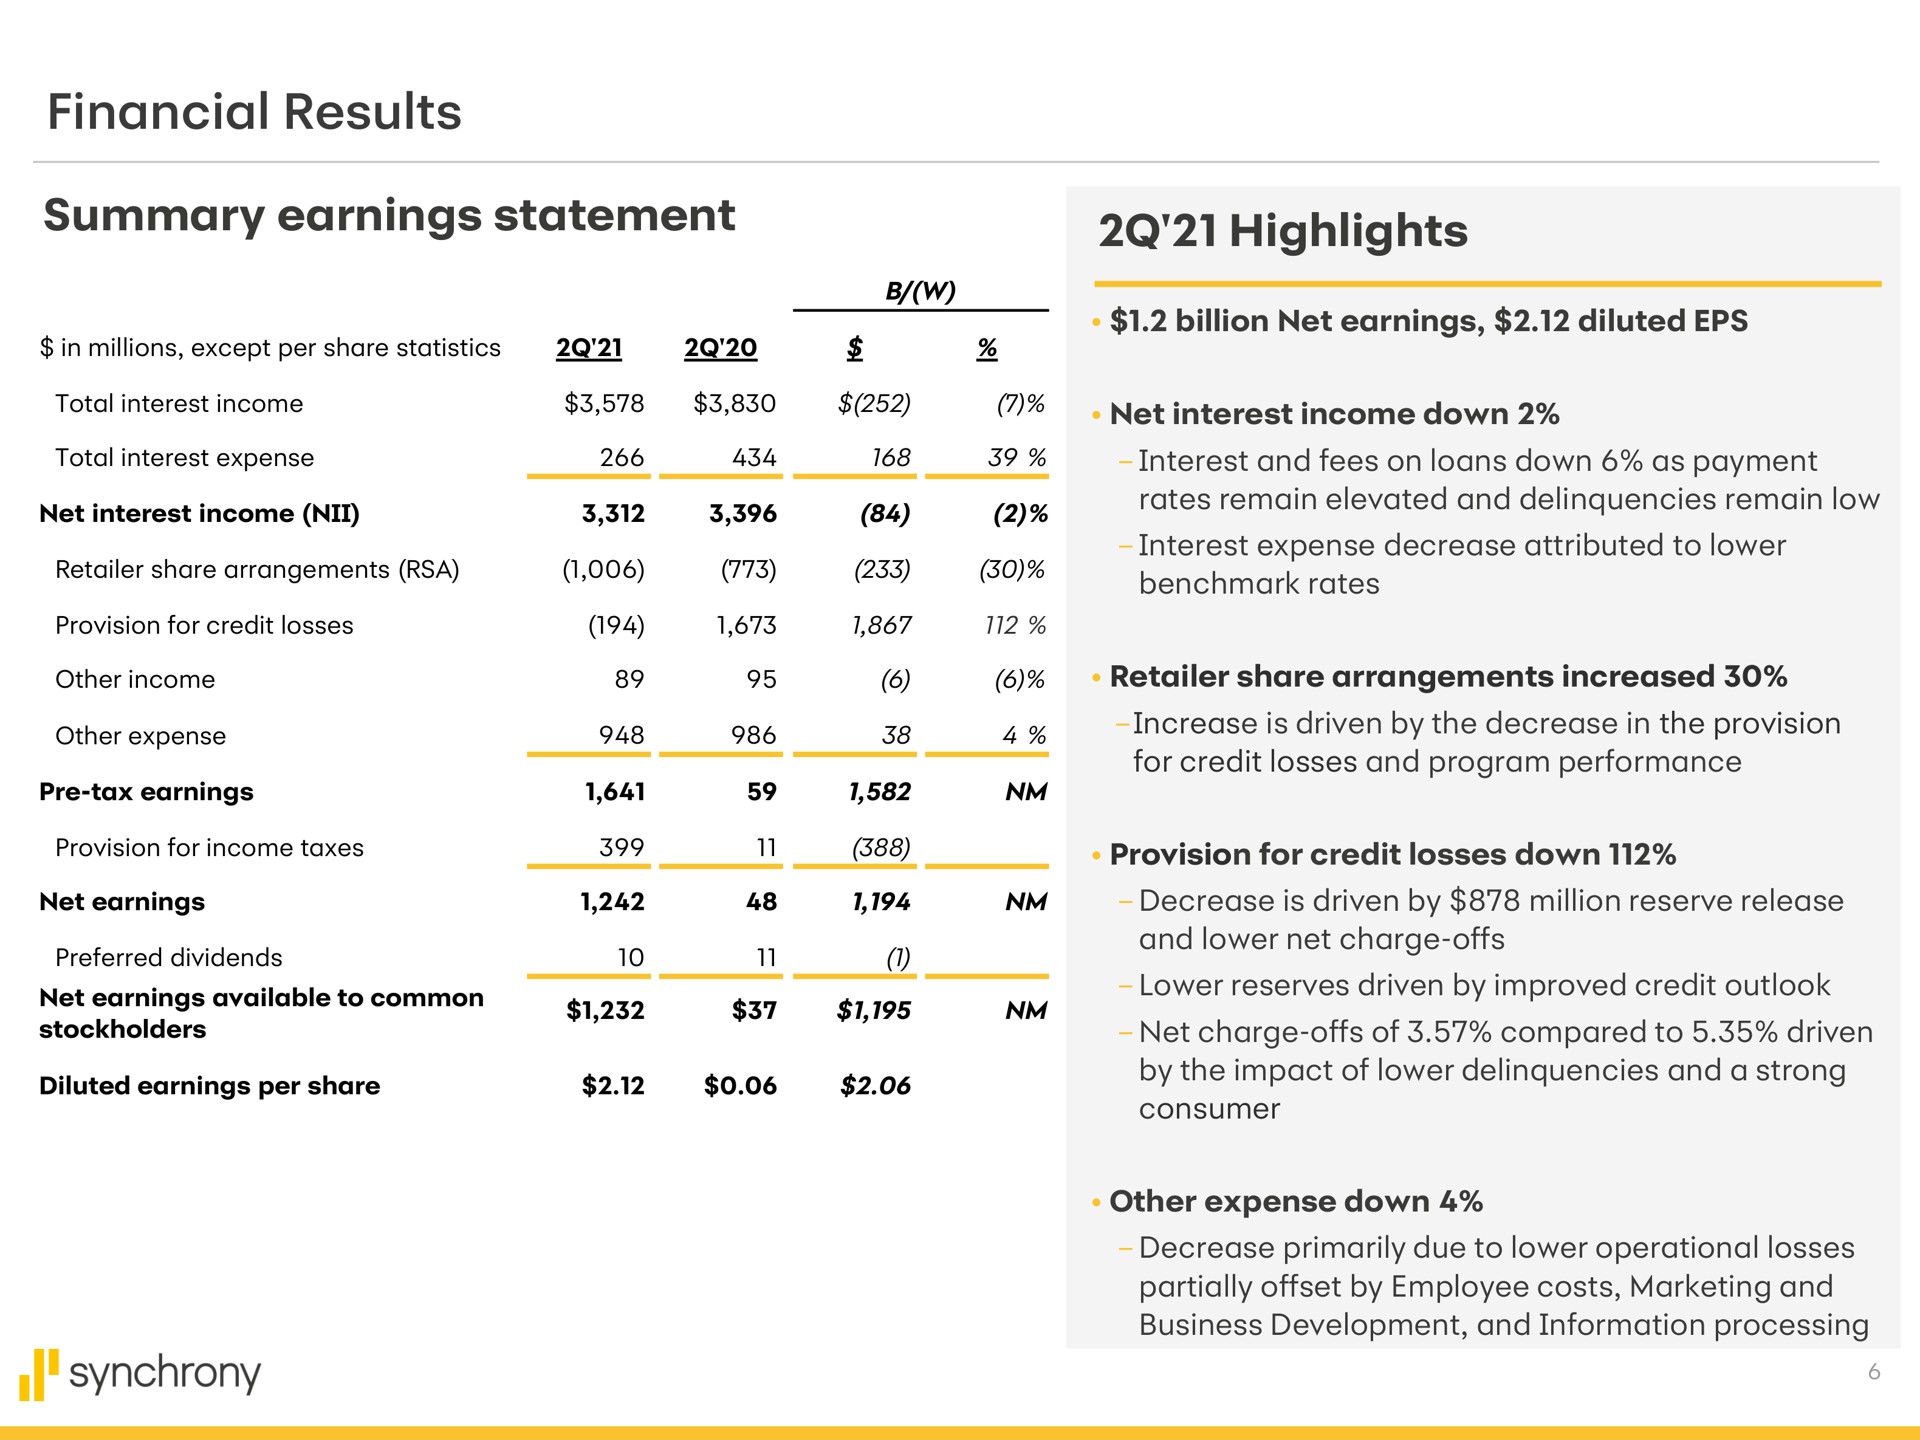 financial results summary earnings statement highlights billion net diluted provision for income taxes stockholders synchrony provision for credit losses down net charge offs of compared to driven | Synchrony Financial